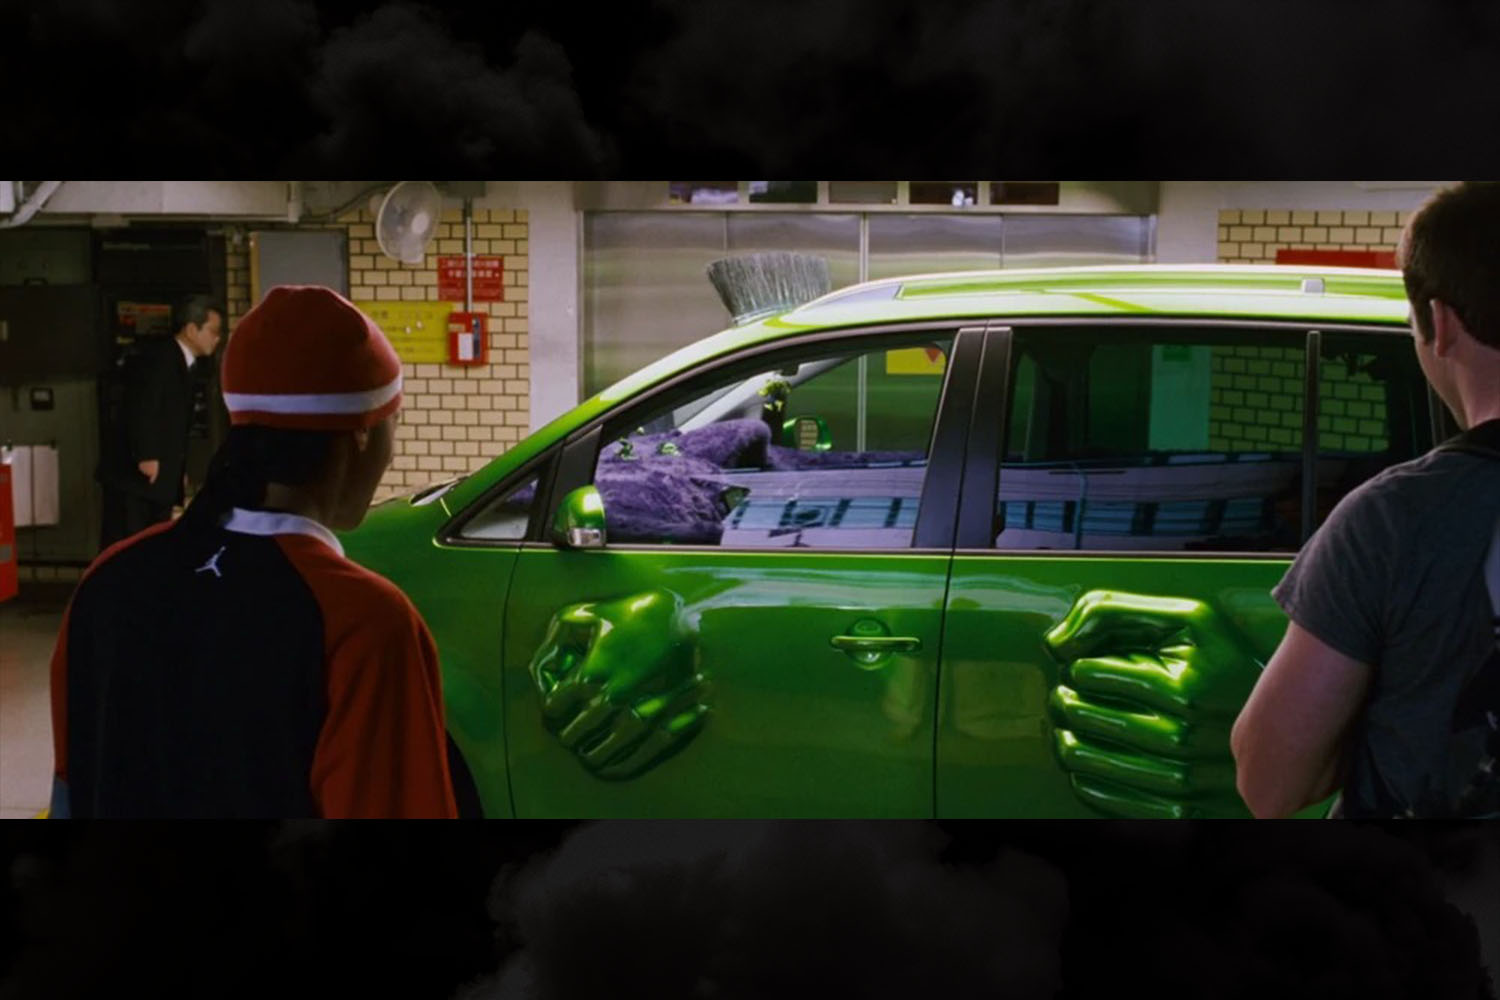 Hulk fists smashing through the doors of the mean green 2005 Volkswagen Touran owned by Twinkie (Bow Wow) in The Fast and the Furious: Tokyo Drift